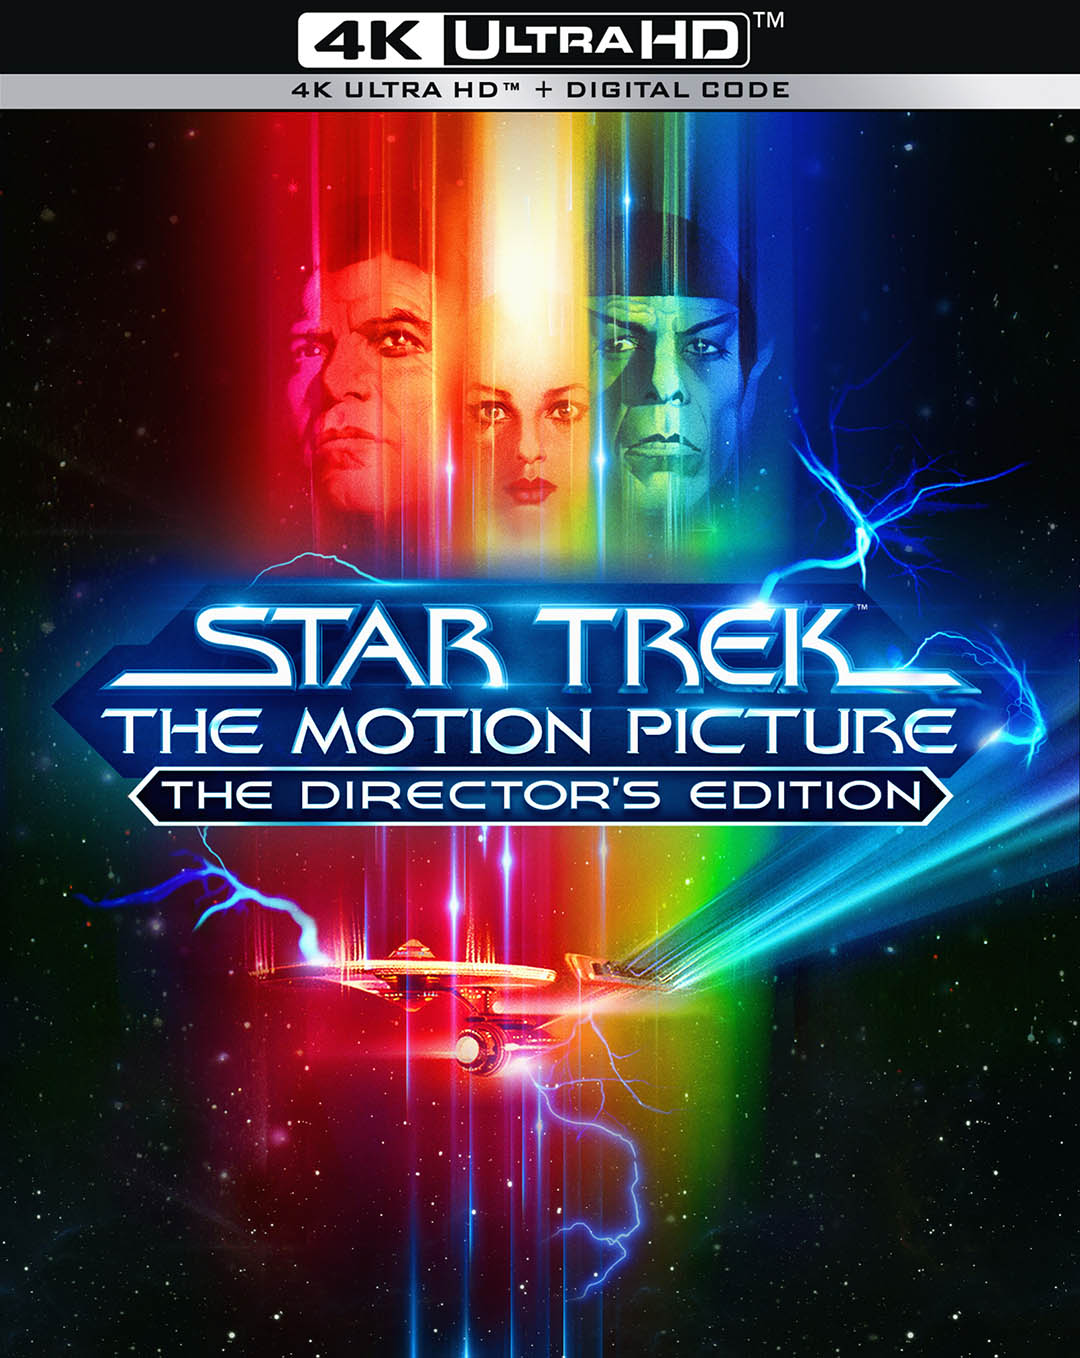 Star Trek: The Motion Picture - The Director’s Edition